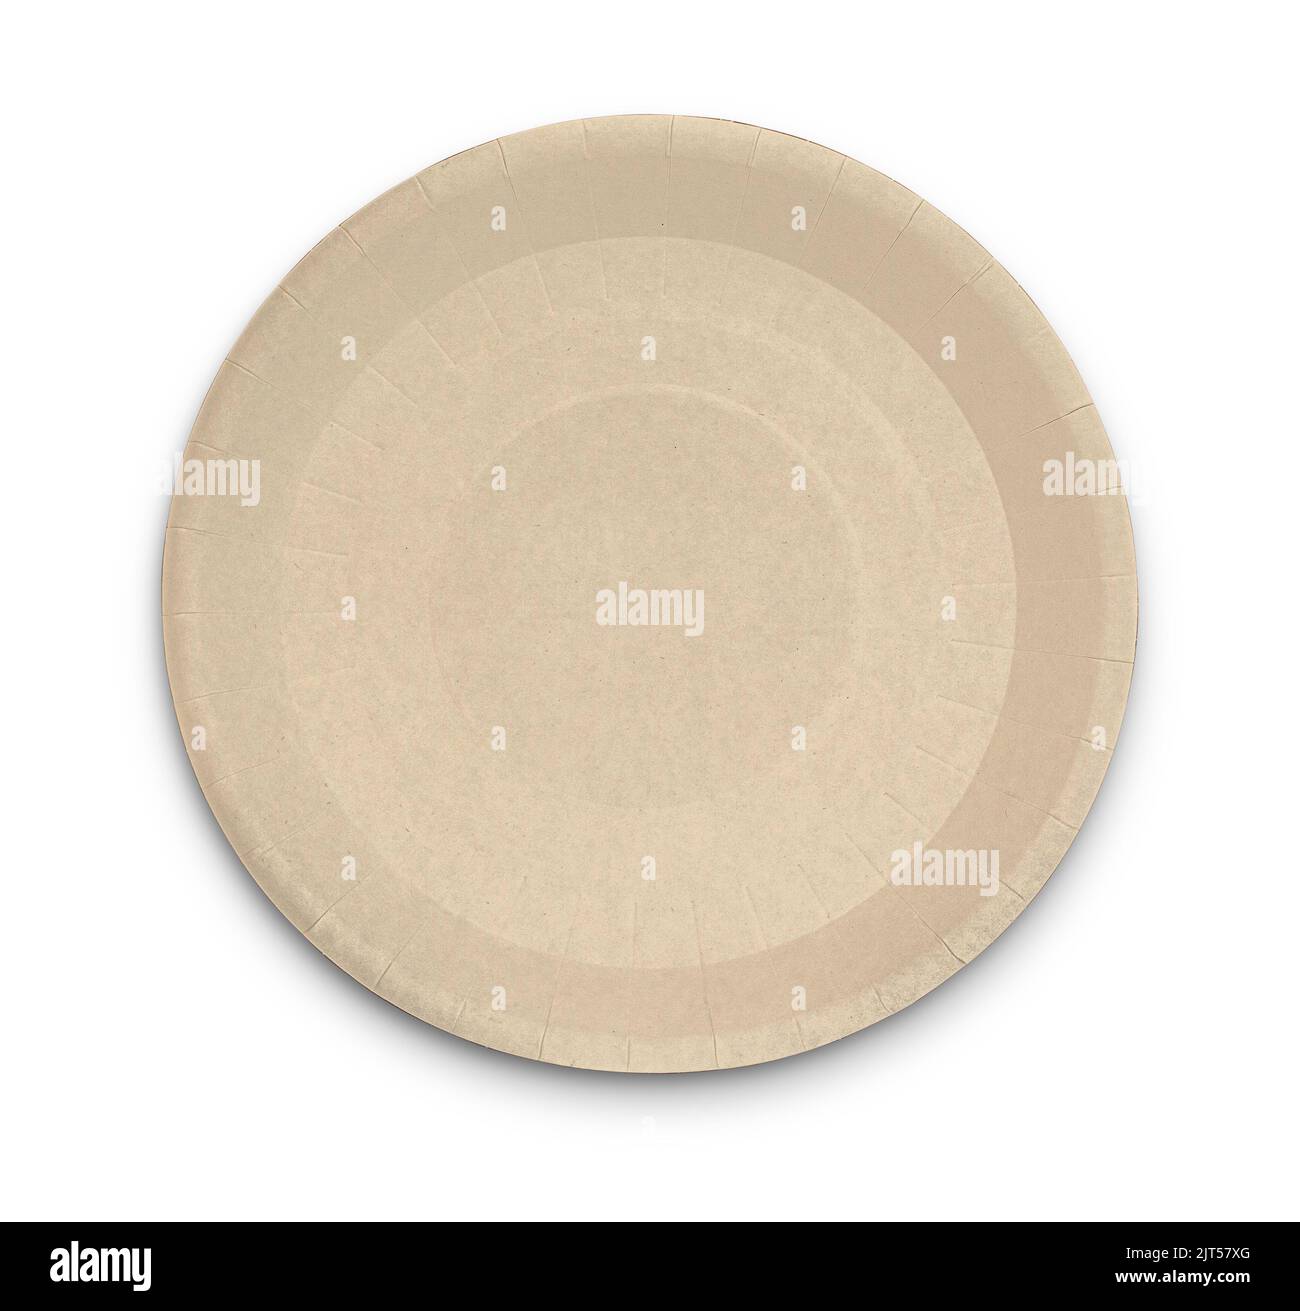 cardboard disposable plate top view, isolated on white with clipping path Stock Photo